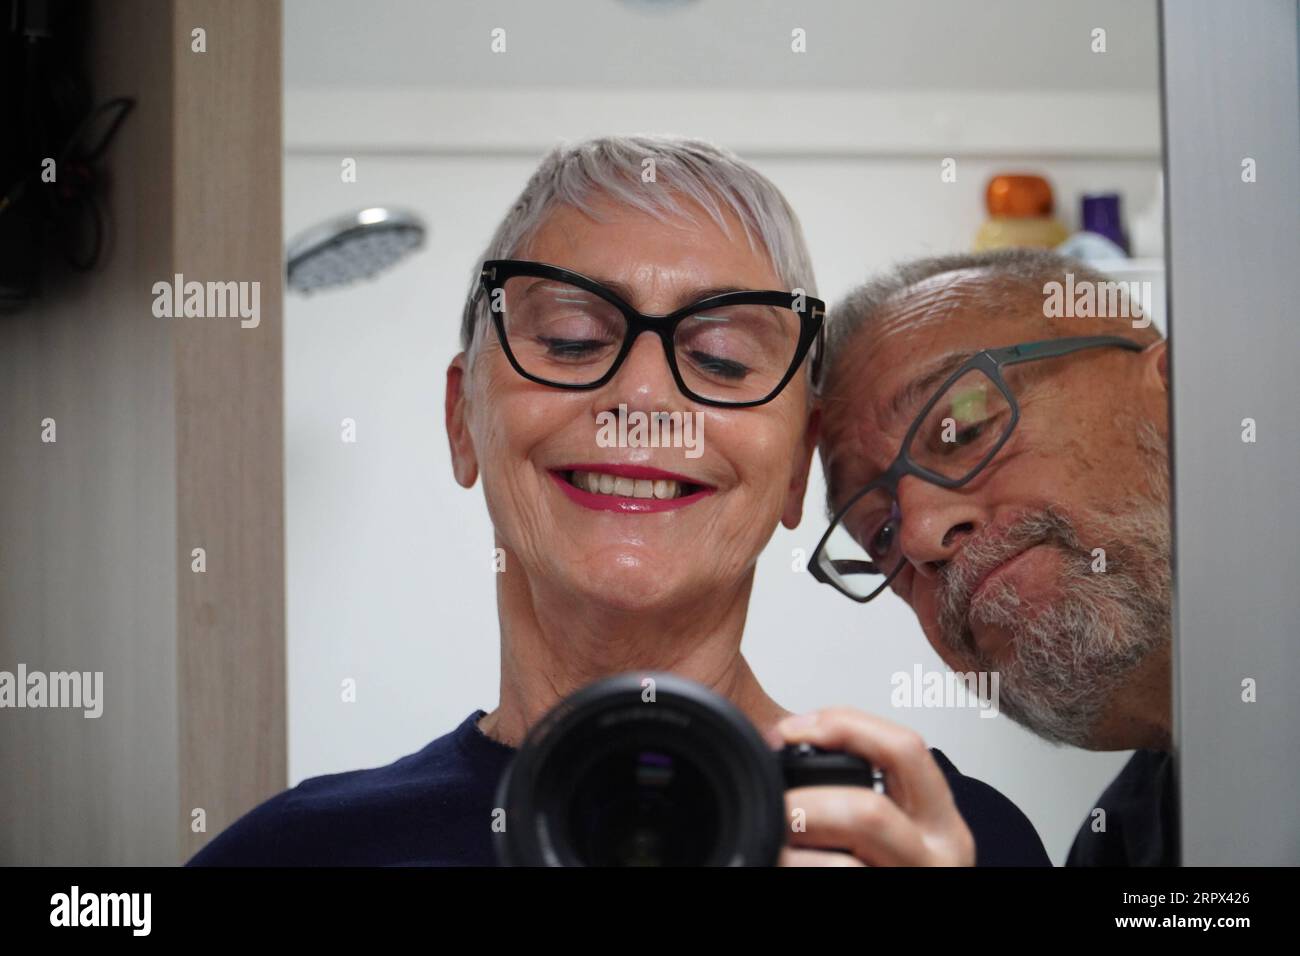 200506 -- TALAVERA DE LA REINA, May 6, 2020 -- Carlos Miro Mancebo R and his wife Charo Conde Baruque take photos in front of a mirror in their mobile home parked in an industrial estate in the town of Talavera de la Reina in central Spain, April 29, 2020. Spanish travelers, Carlos Miro Mancebo and his wife Charo Conde Baruque, have spent almost two months since Spain was placed under lockdown to stop the spread of the coronavirus in their mobile home parked in an industrial estate in the town of Talavera de la Reina in central Spain. TO GO WITH Feature: Spanish nomad couple spends lockdown in Stock Photo